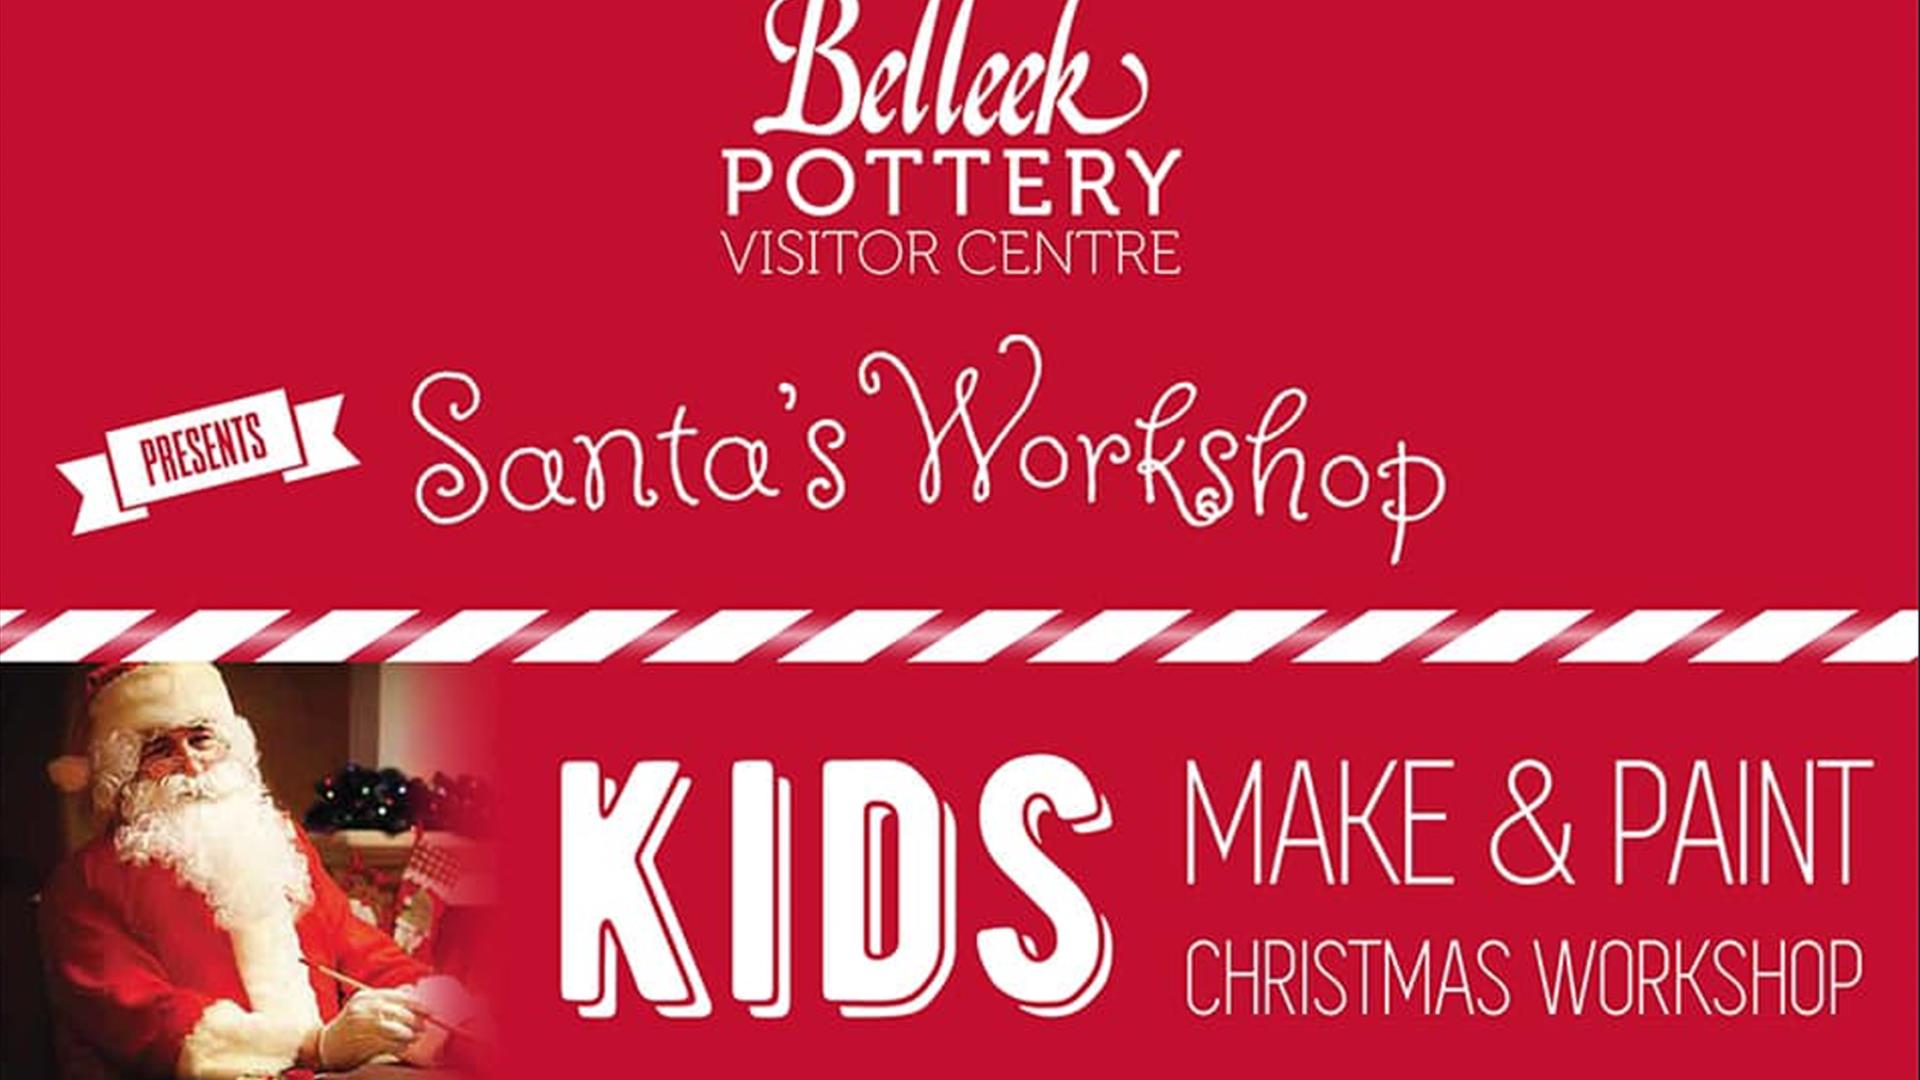 Christmas at Belleek Pottery Visitor Centre